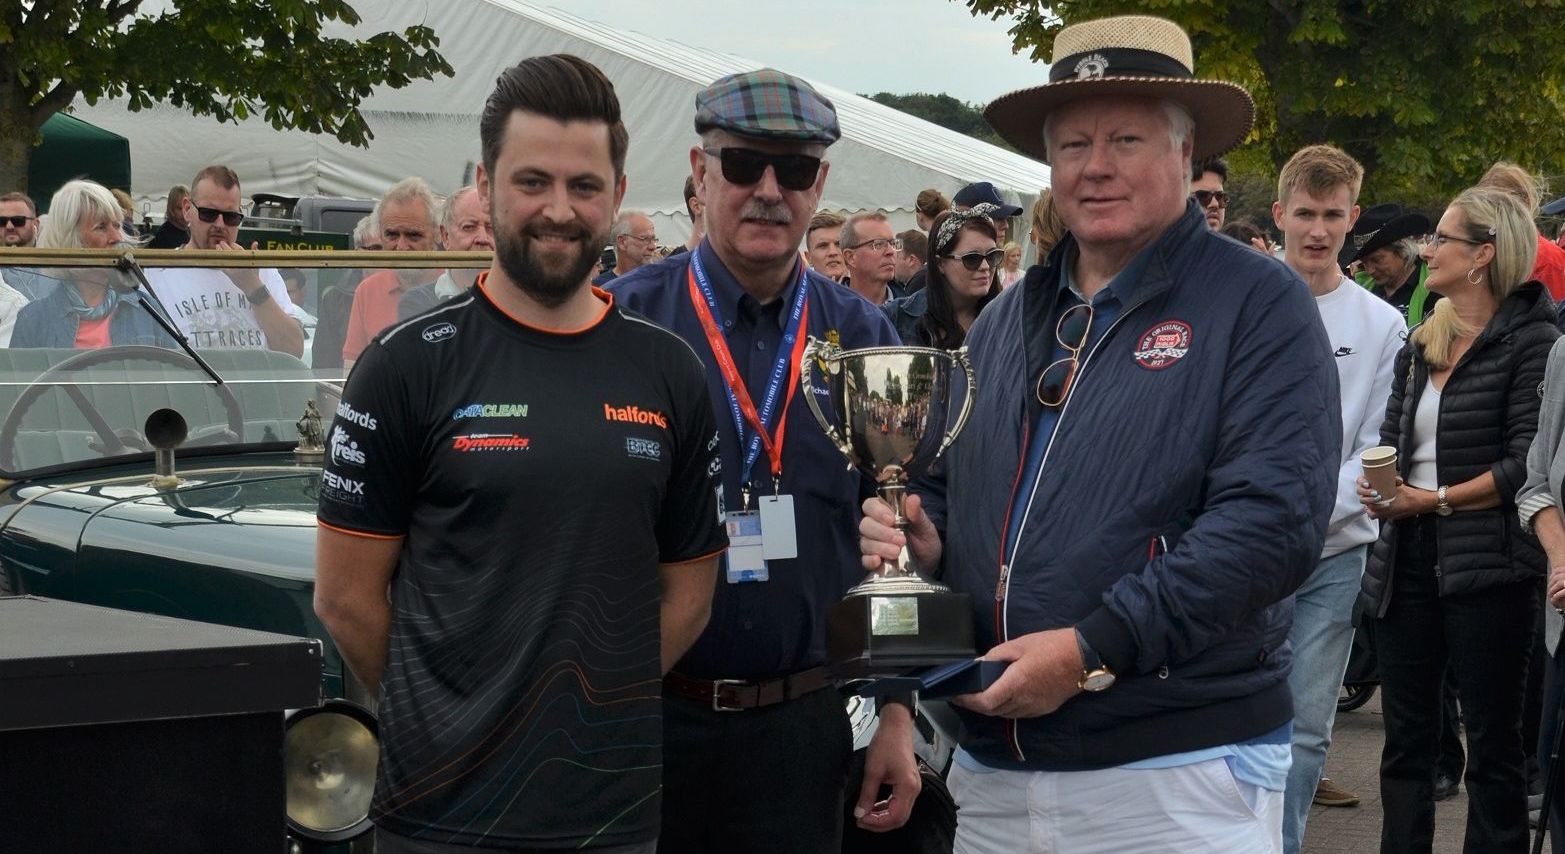 Daniel Rowbottom presents Brian Ellis with the Best in Show award at Southport Classic and Speed at Victoria Park in Southport. Photo by Stephen Mosley